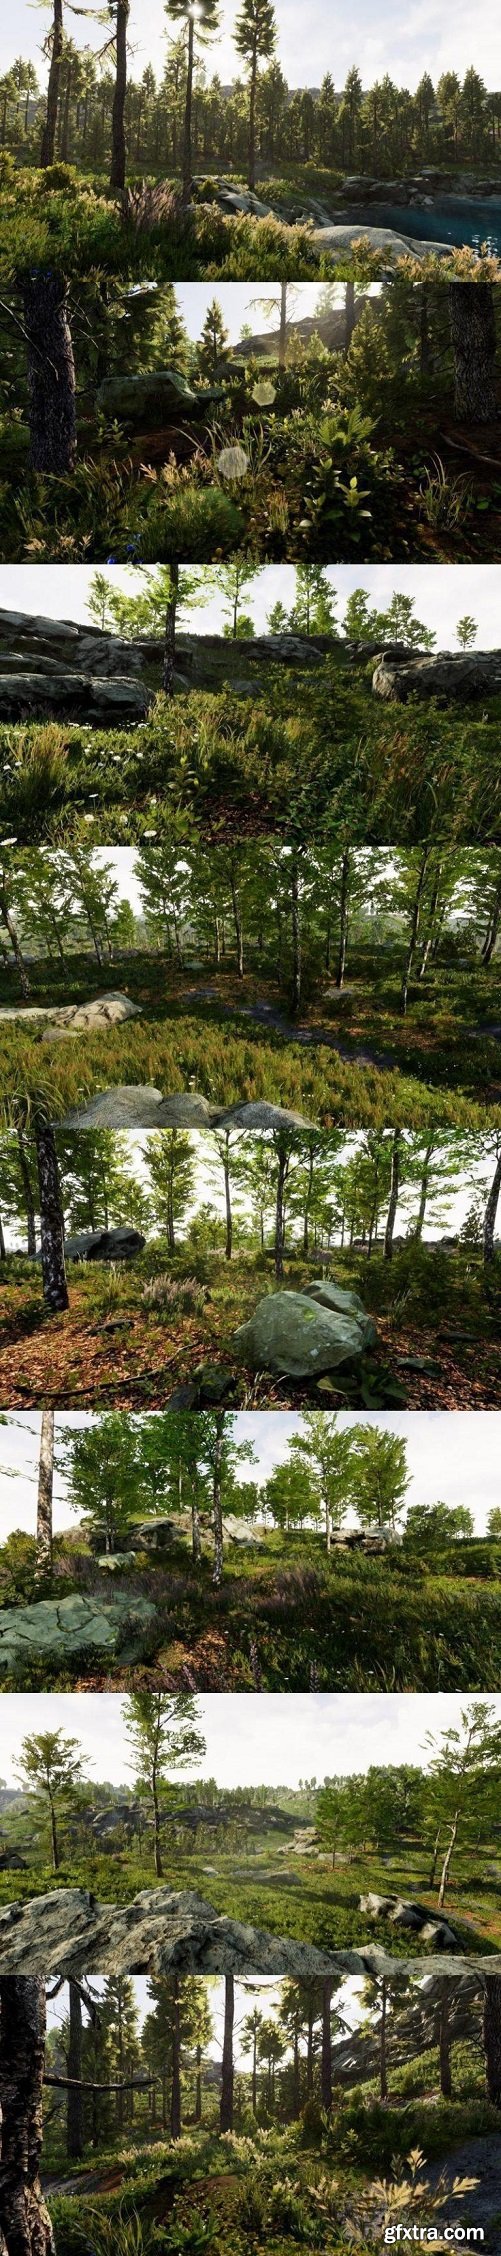 Unreal Engine – Landscape Pro 3 - Automatic Natural Environment Creation Tool